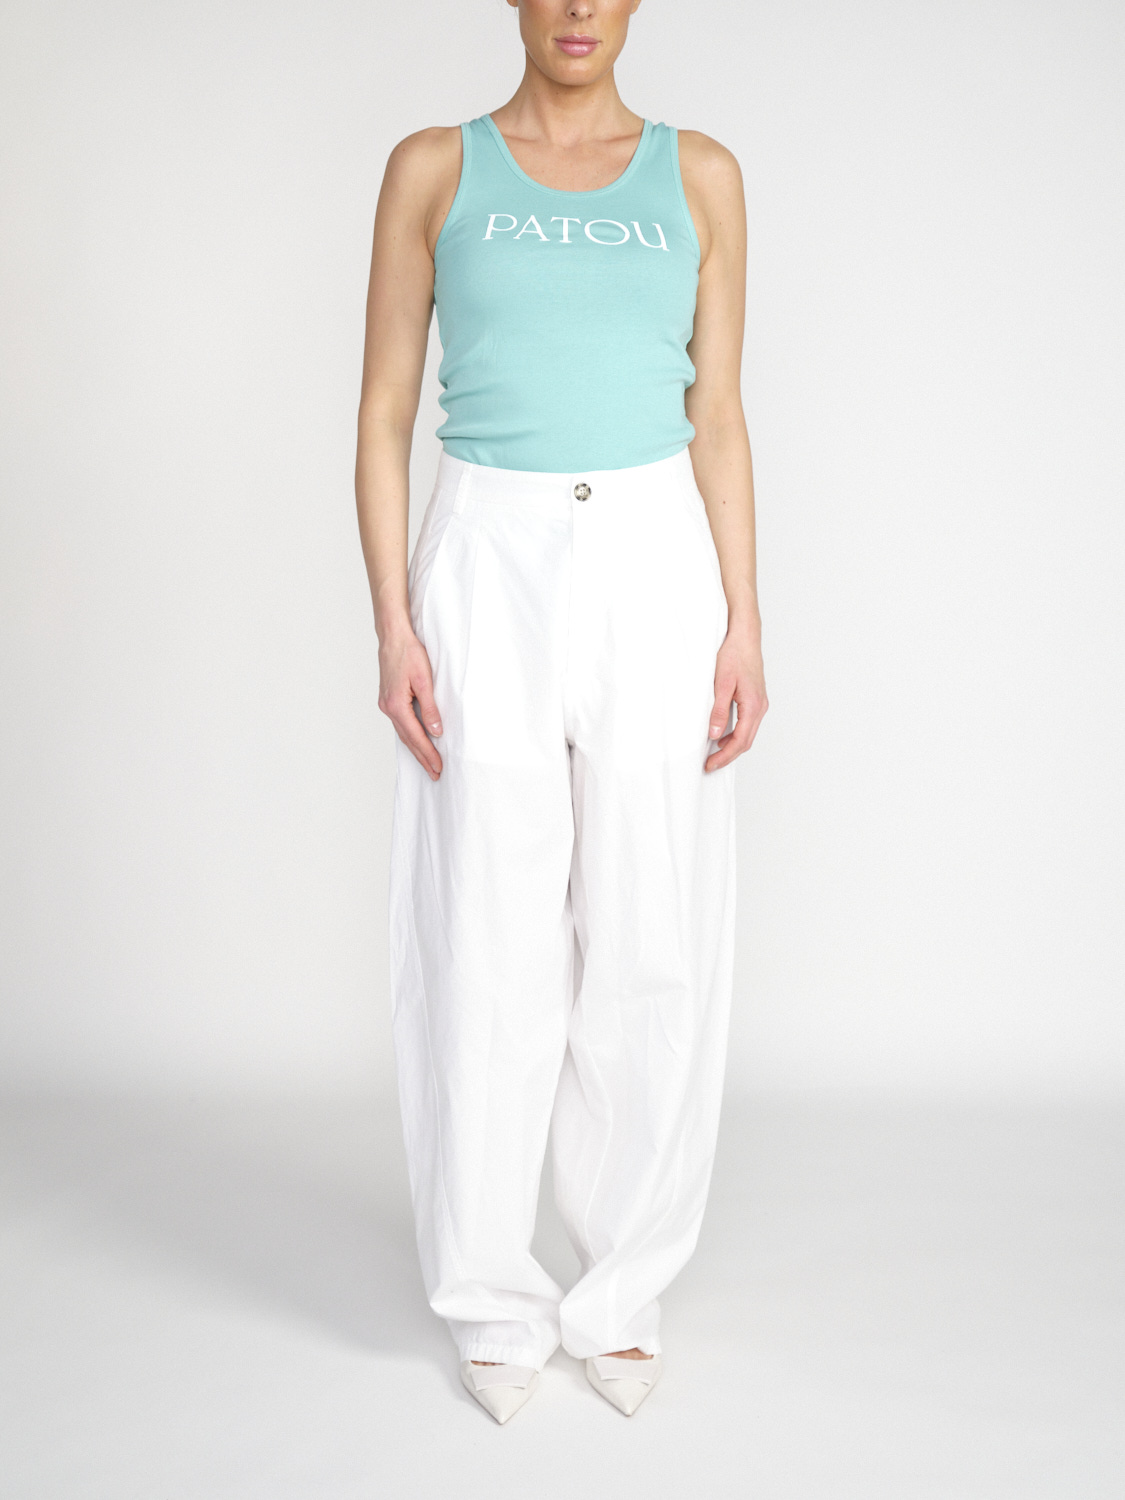 Patou Iconic Tank - Tank top made from organic cotton  mint M